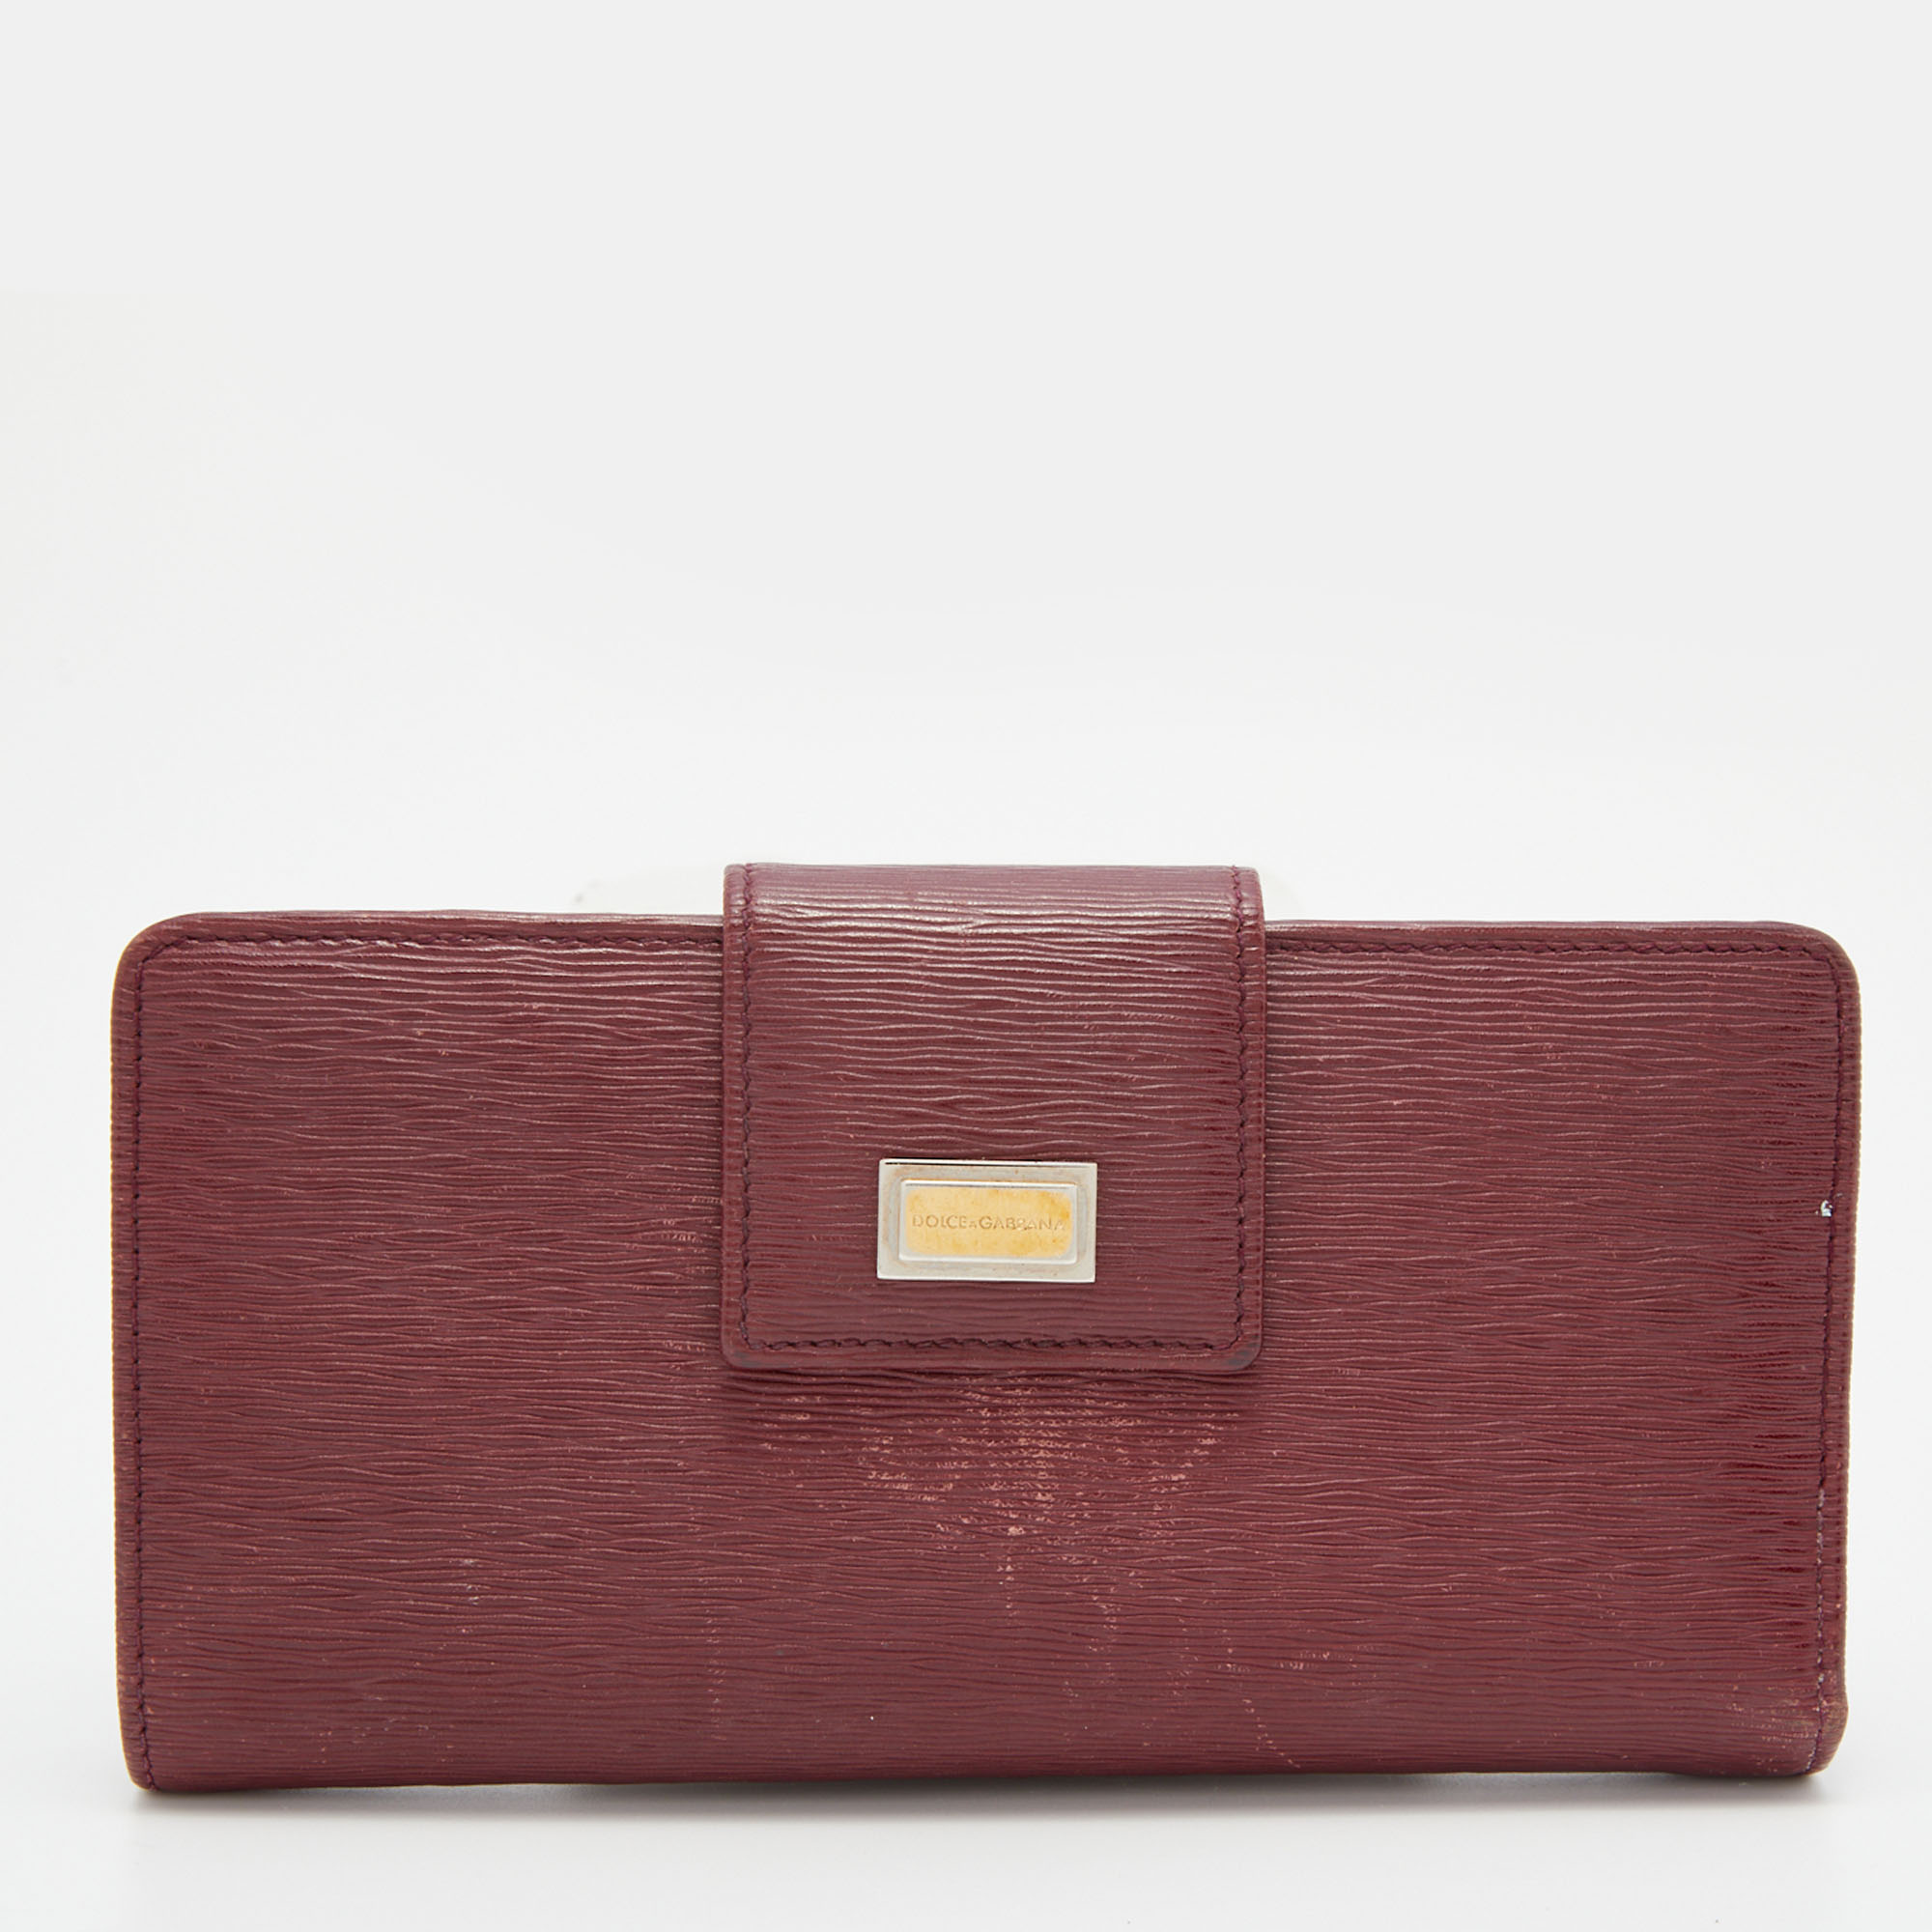 Pre-owned Dolce & Gabbana Burgundy Leather Flap Continental Wallet